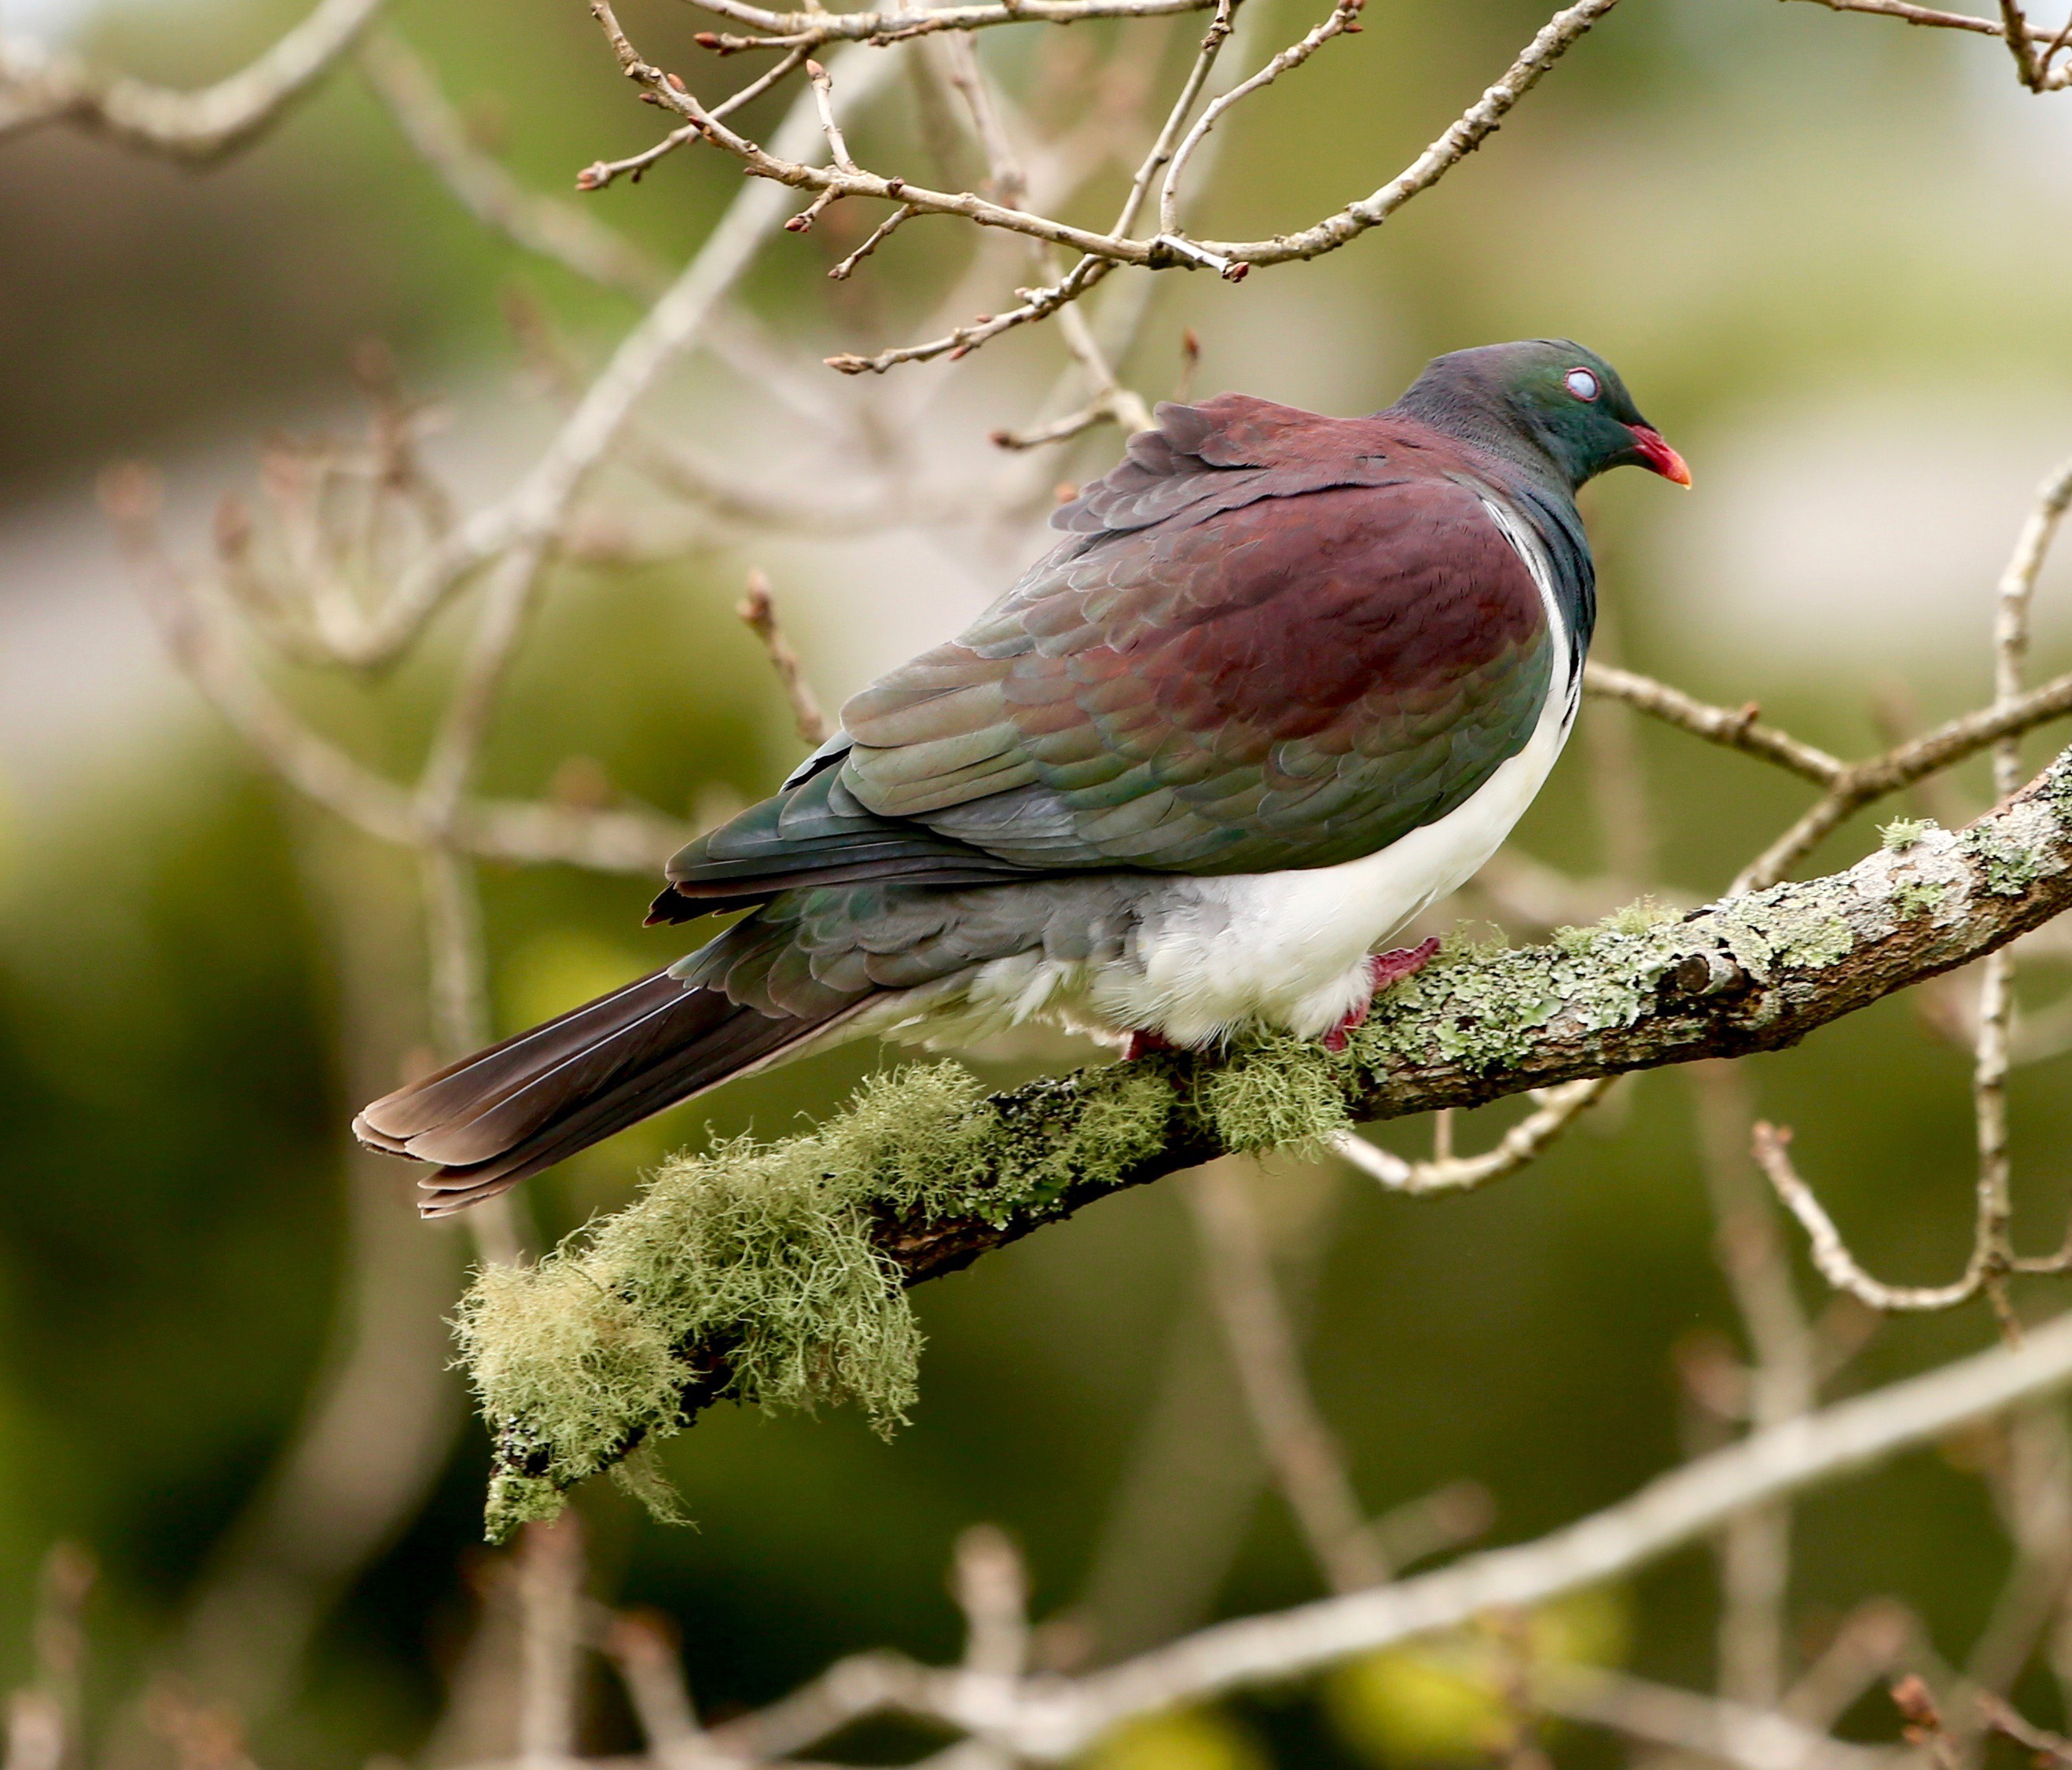 Wood Pigeon on Branch image - Free stock photo - Public Domain photo ...